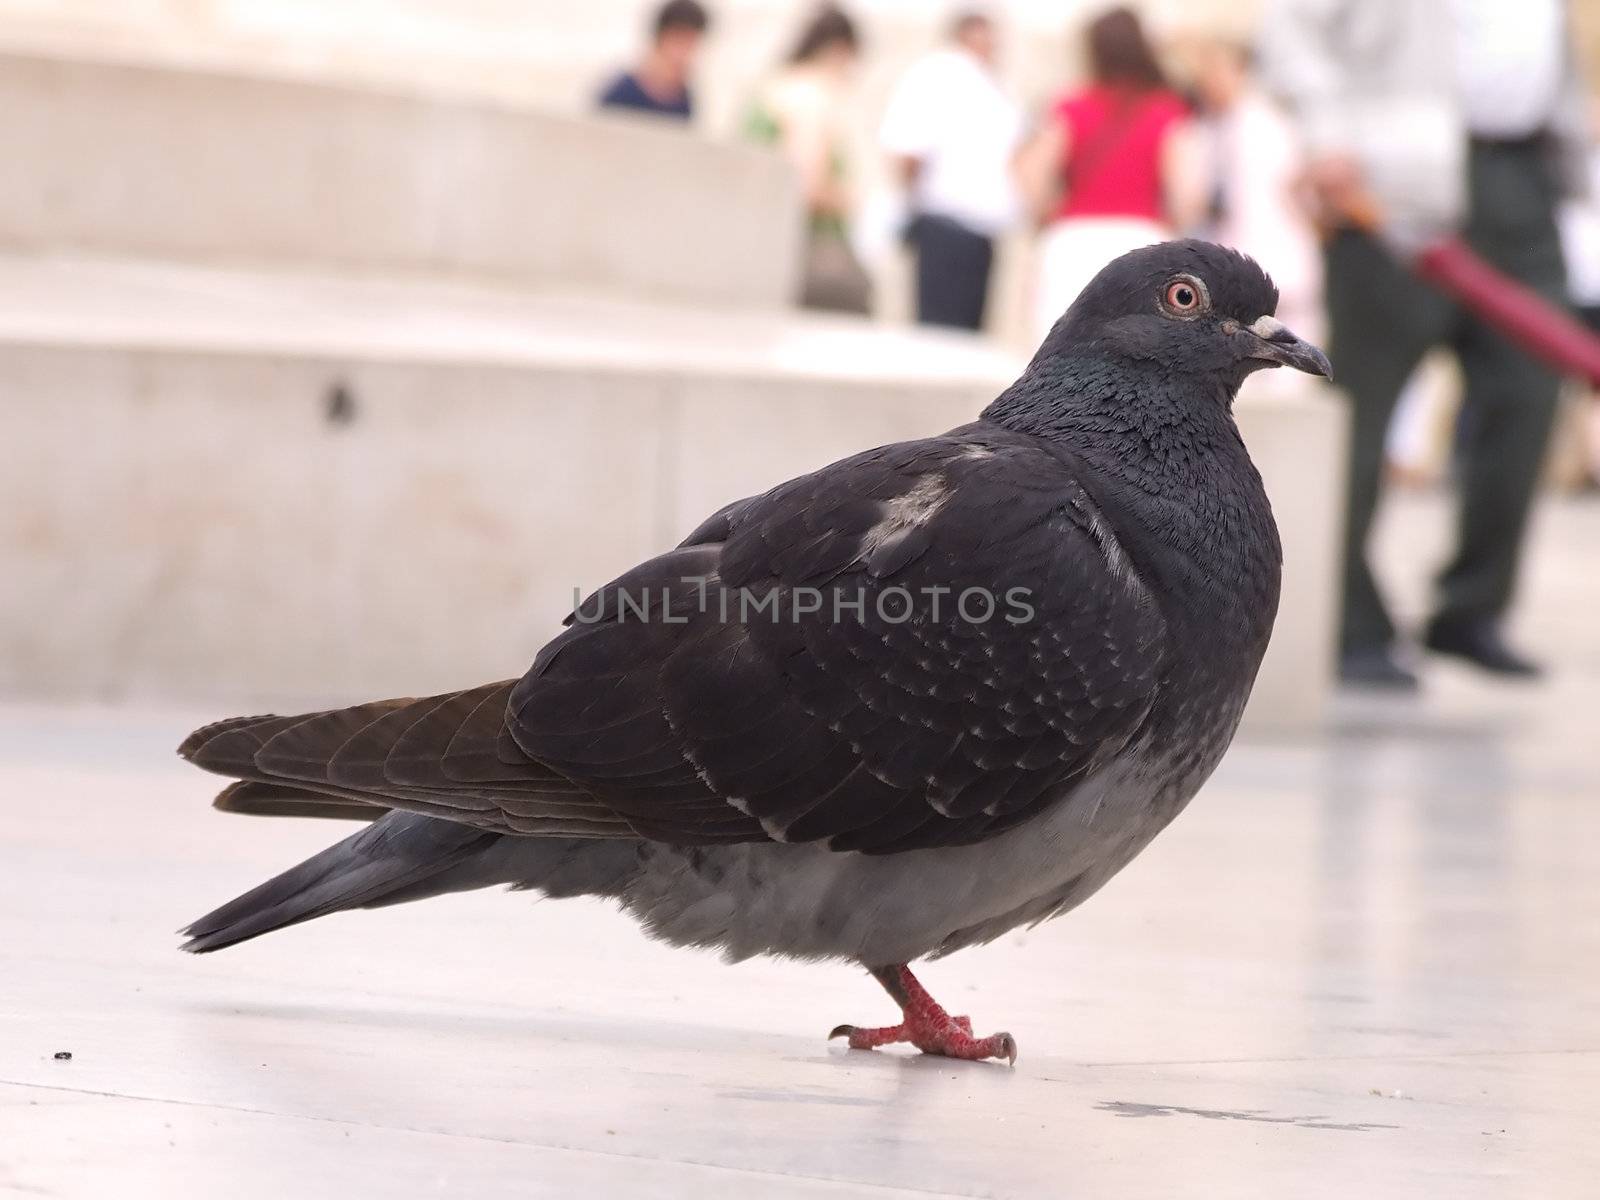 Detail from a city pigeon